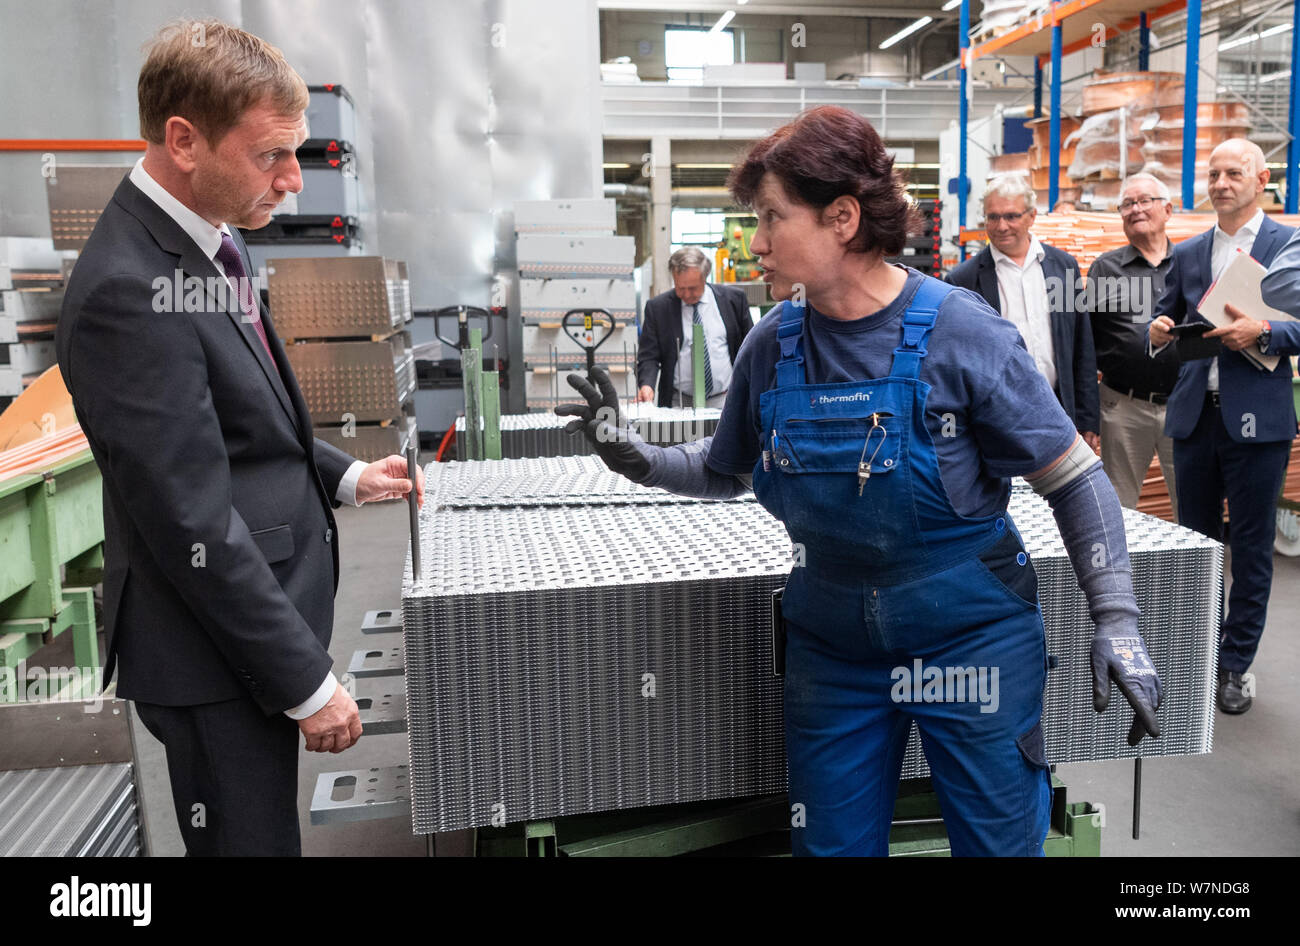 Heinsdorfergrund, Germany. 07th Aug, 2019. Michael Kretschmer (CDU, l), Prime Minister of Saxony, is explained how to assemble heat exchangers by Elke Wentsche during a tour of the Thermofin GmbH production facility. Thermofin is an internationally active company in the production of components for refrigeration and air conditioning. Credit: Robert Michael/dpa-Zentralbild/dpa/Alamy Live News Stock Photo